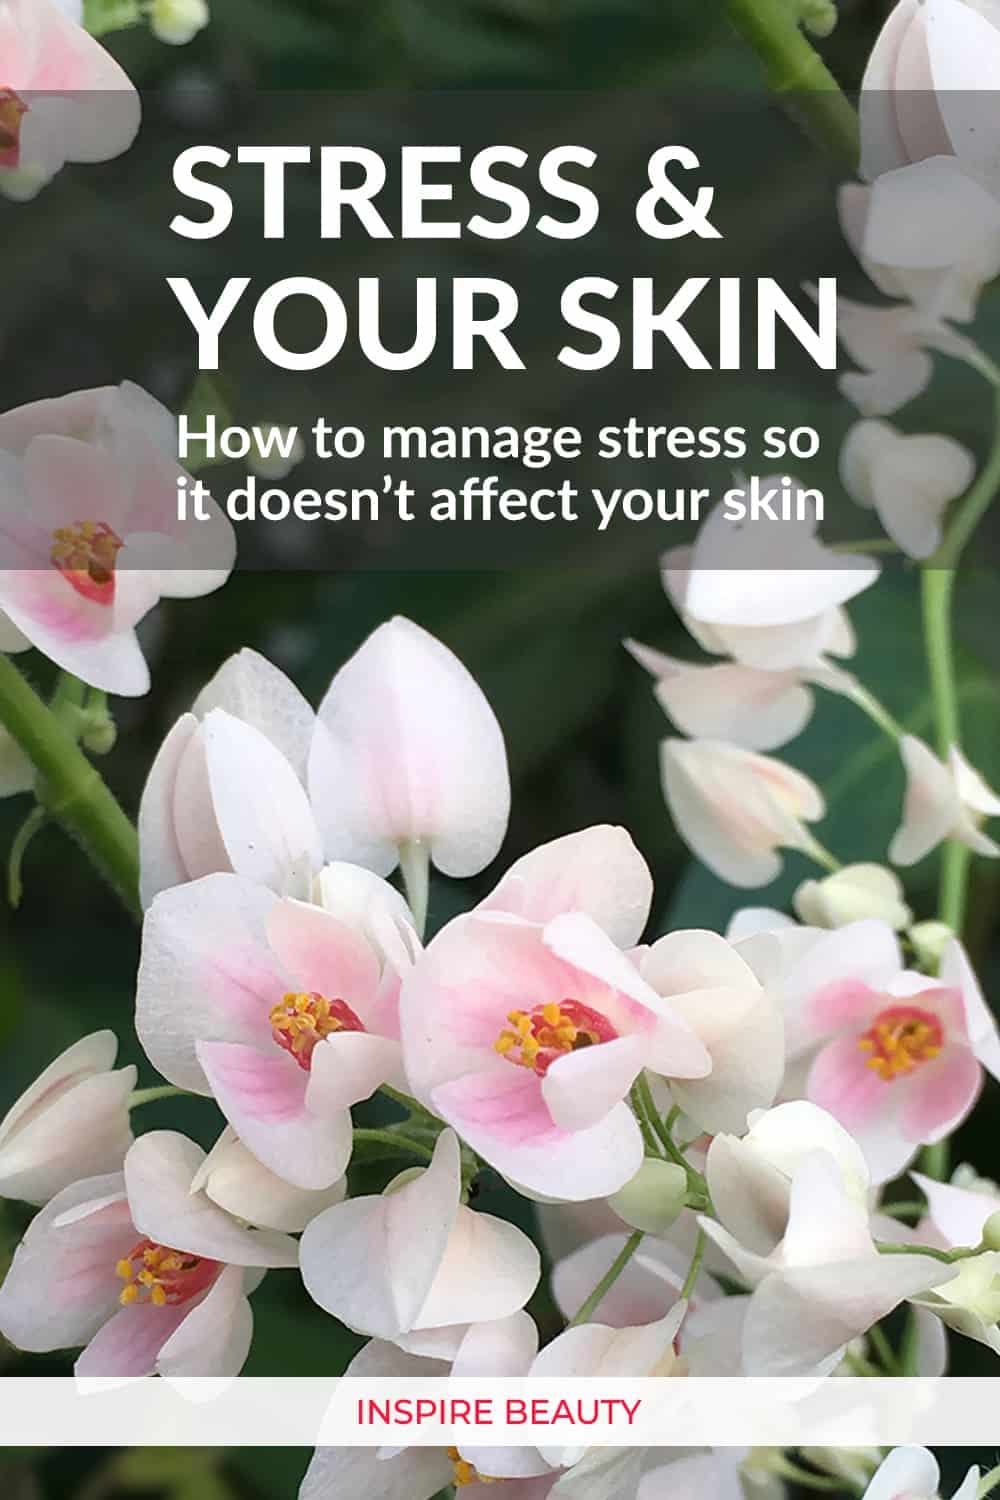 5 tips to help manage stress so it doesn't affect your skin.